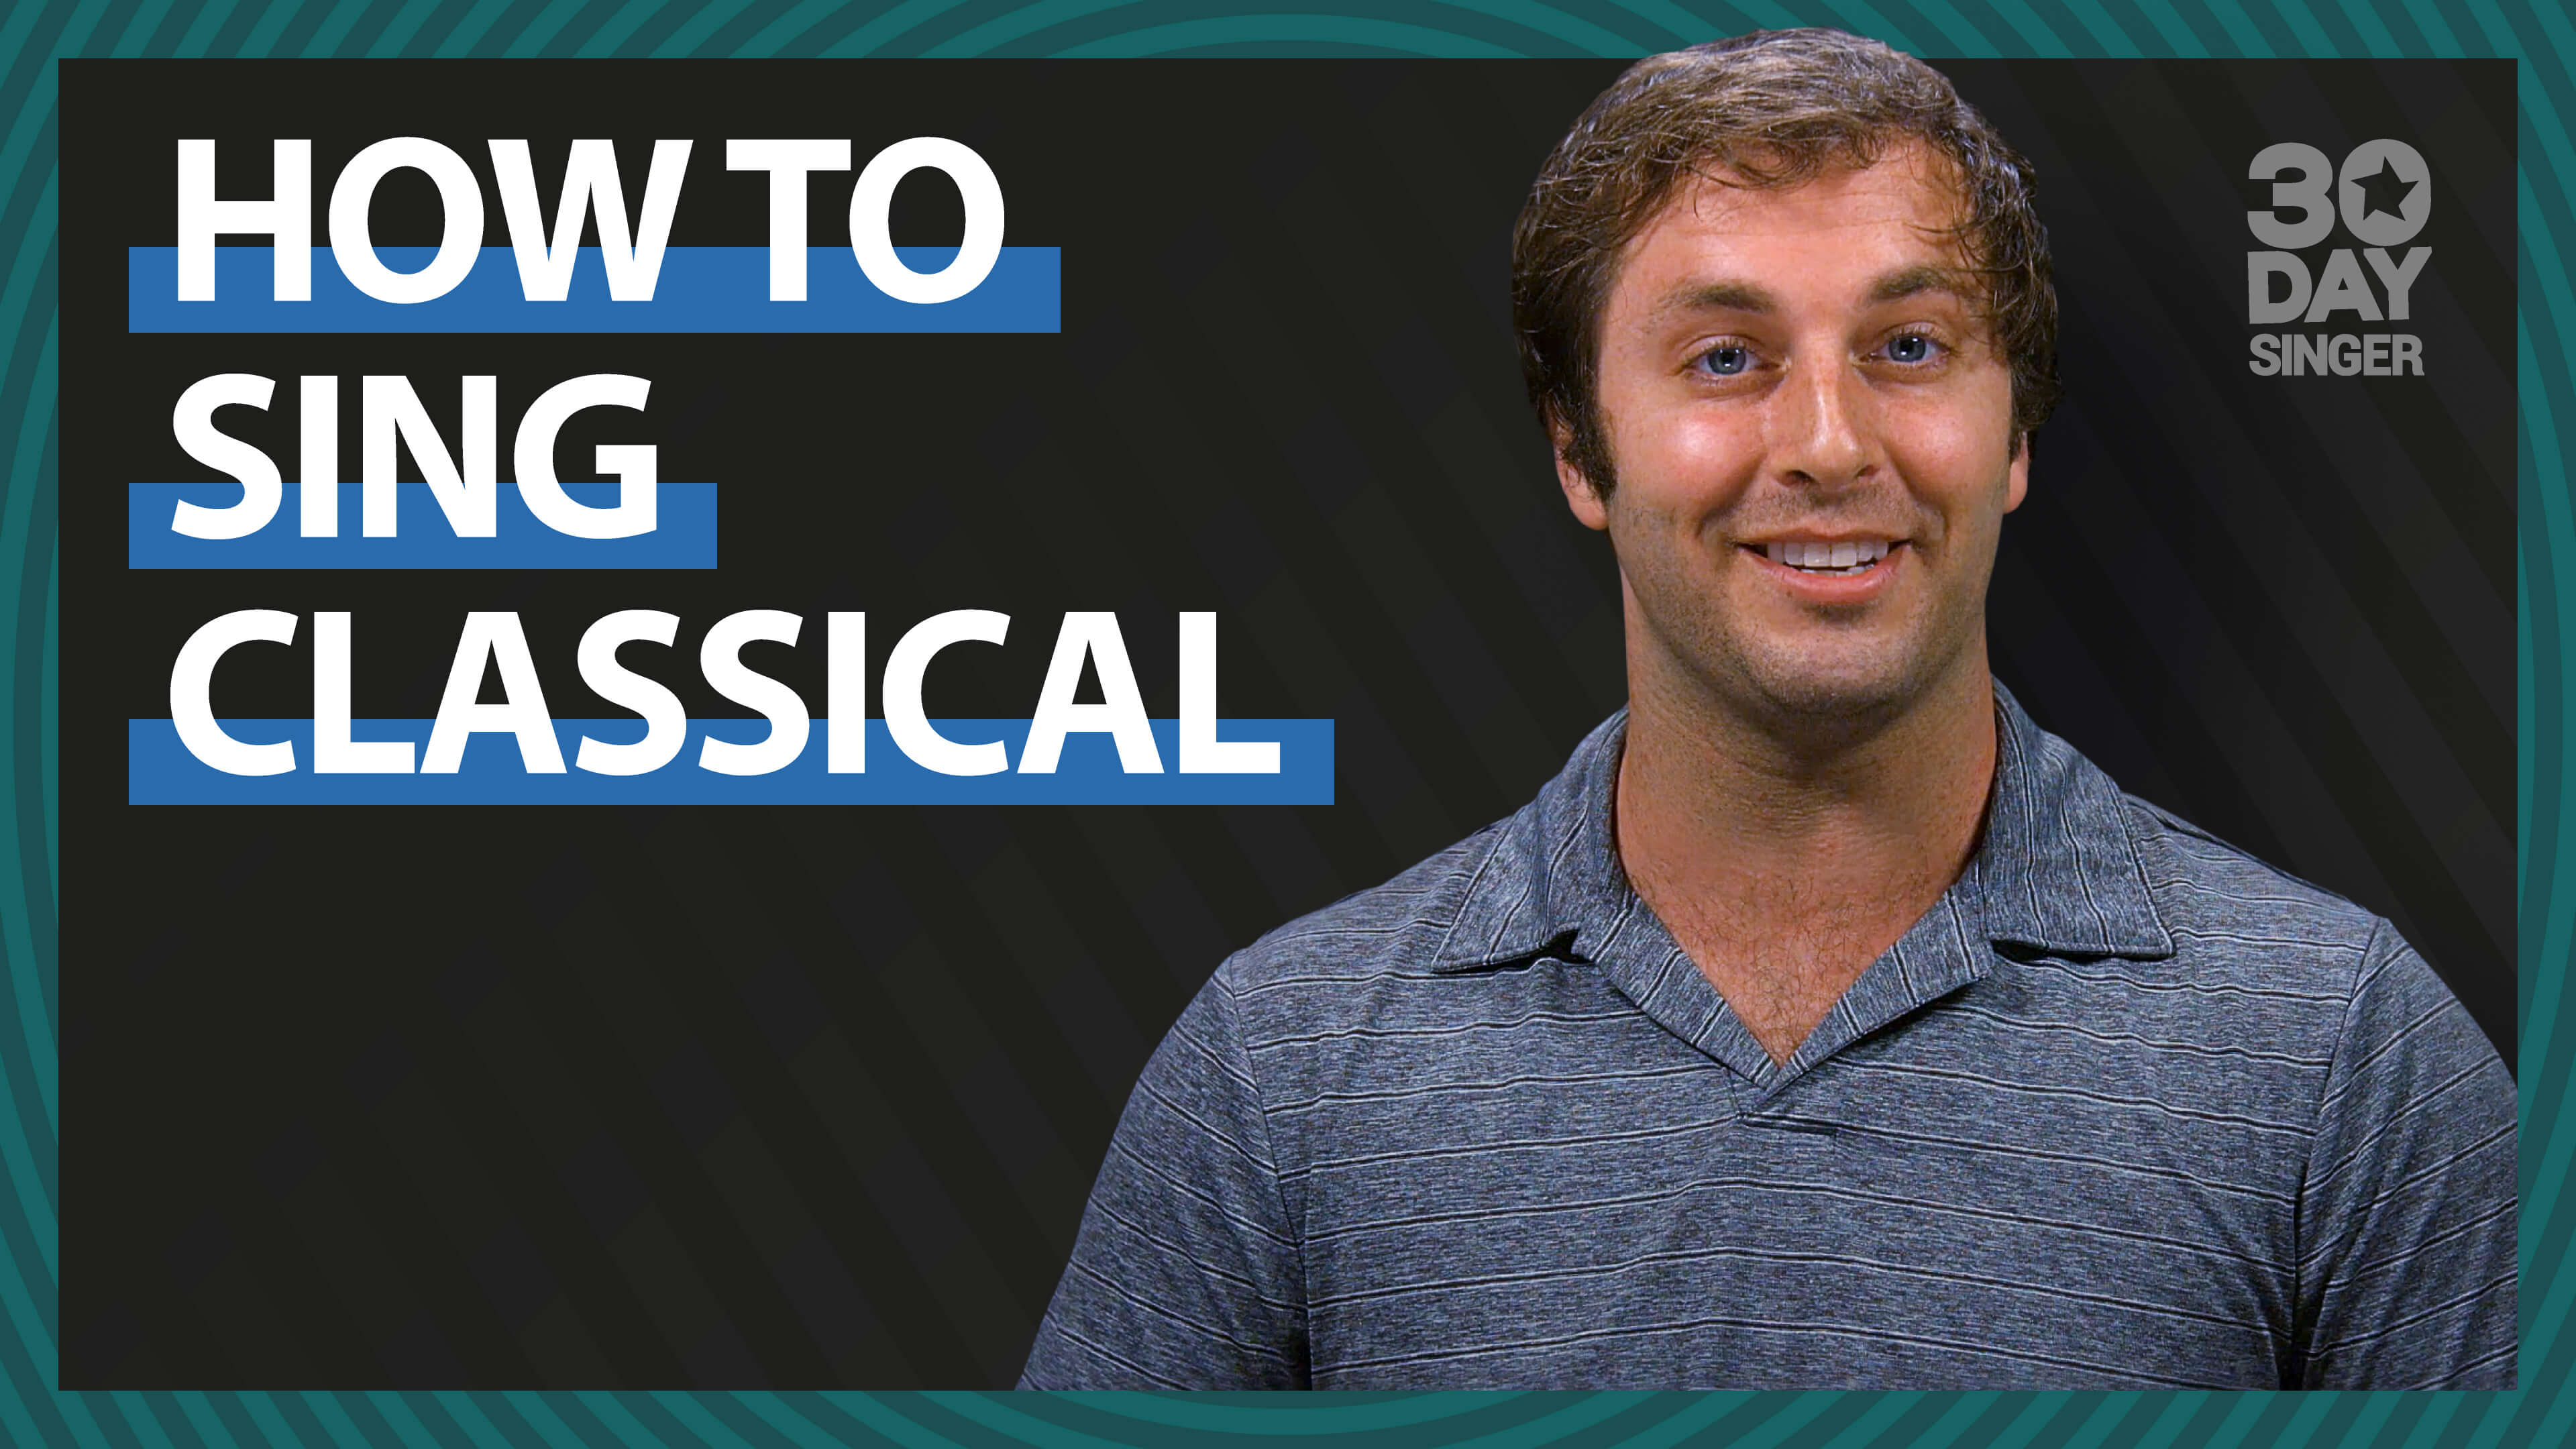 How To Sing Classical